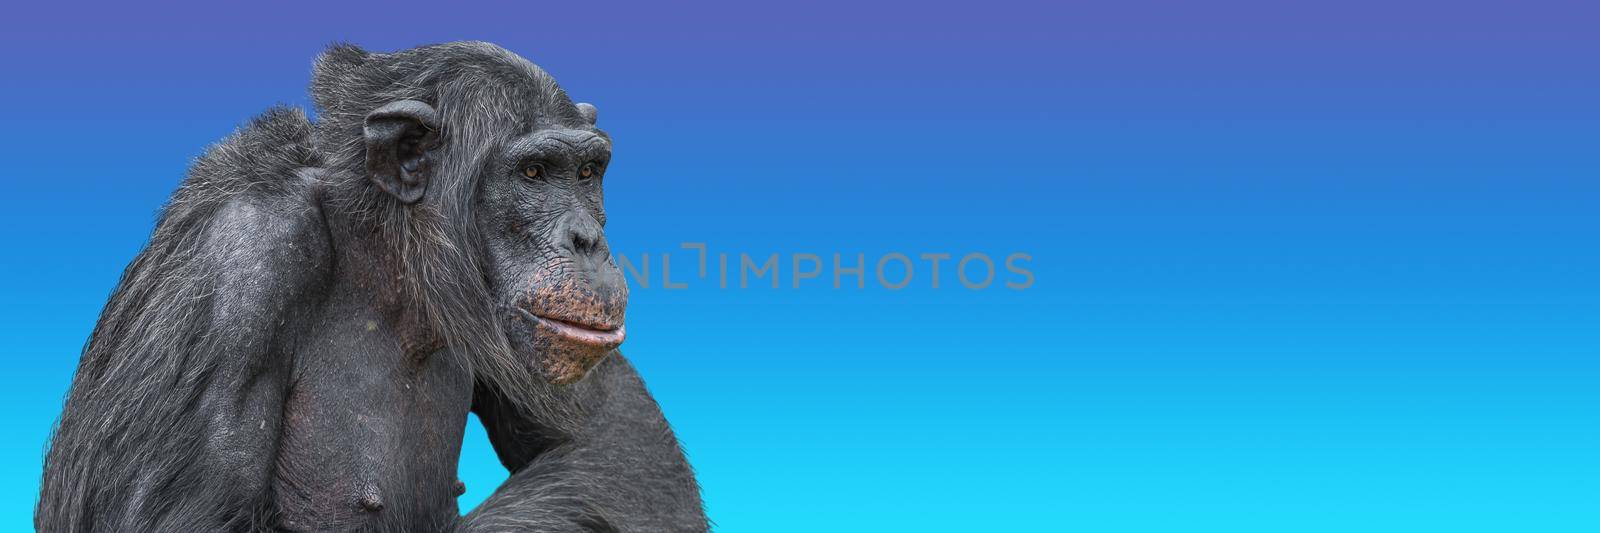 Banner with portrait of serious thinking chimpanzee at blue sky background with copy space for text. Concept animal diversity and wildlife conservation